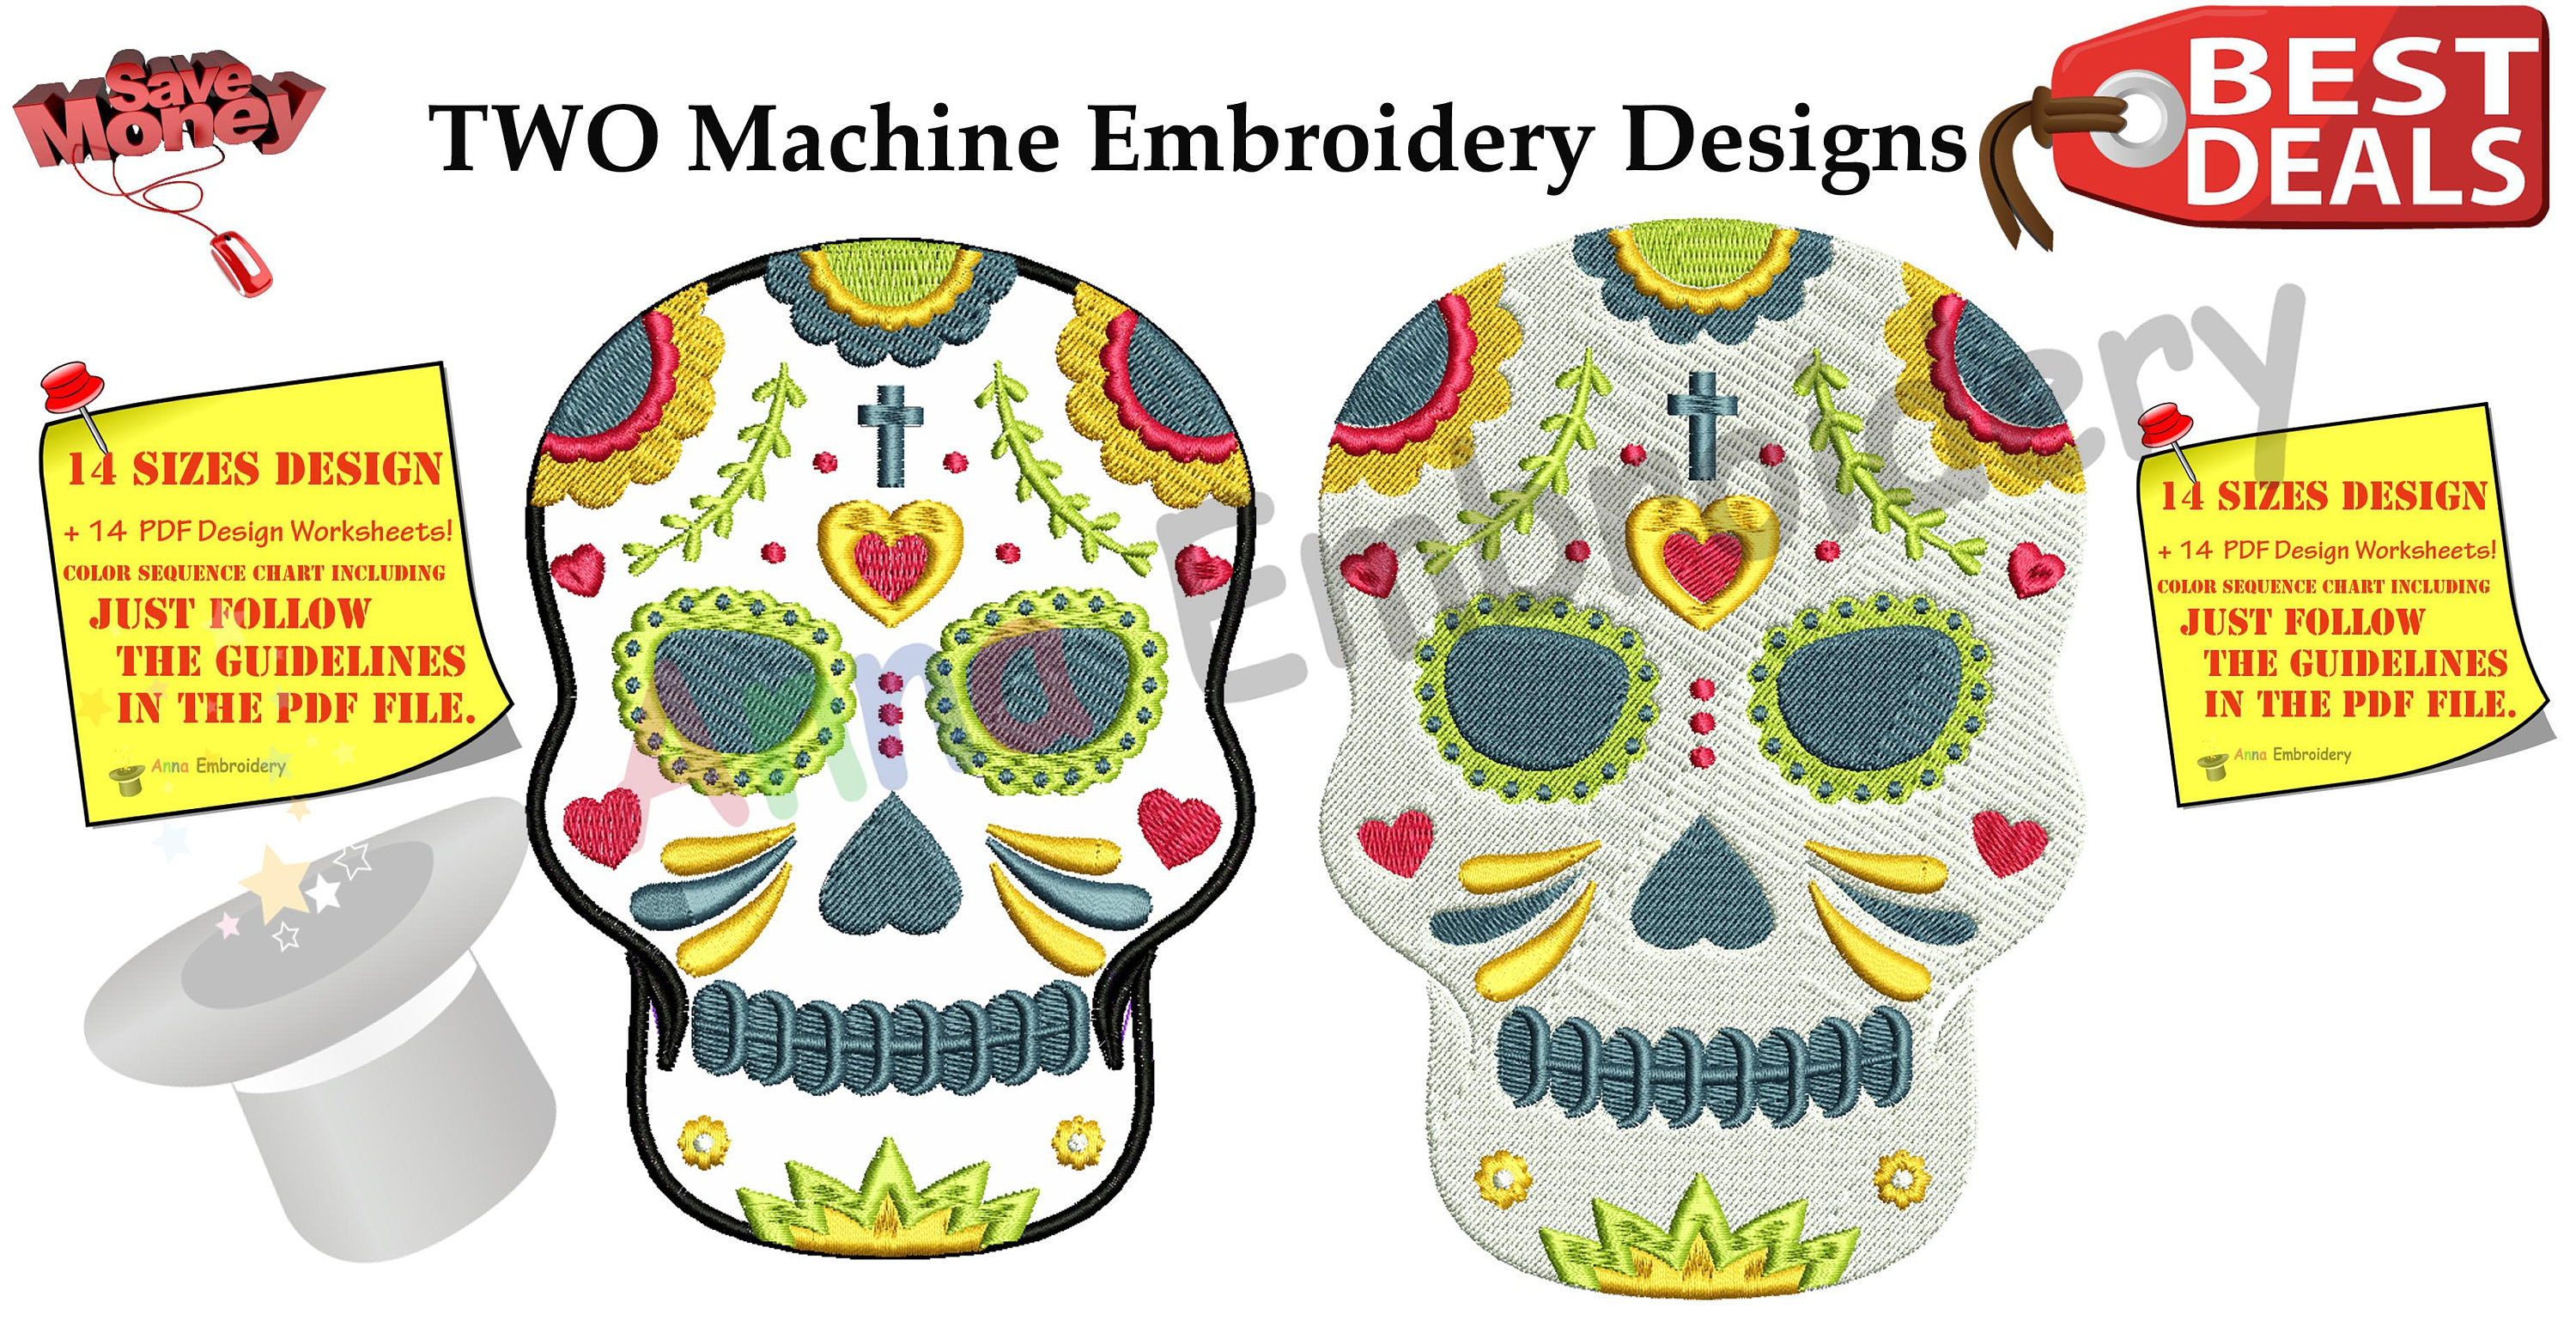 Embroidery Machine Patterns Download Skull Applique Embroidery Design Sugar Skull Pattern Machine Patterns Instant Download Pes